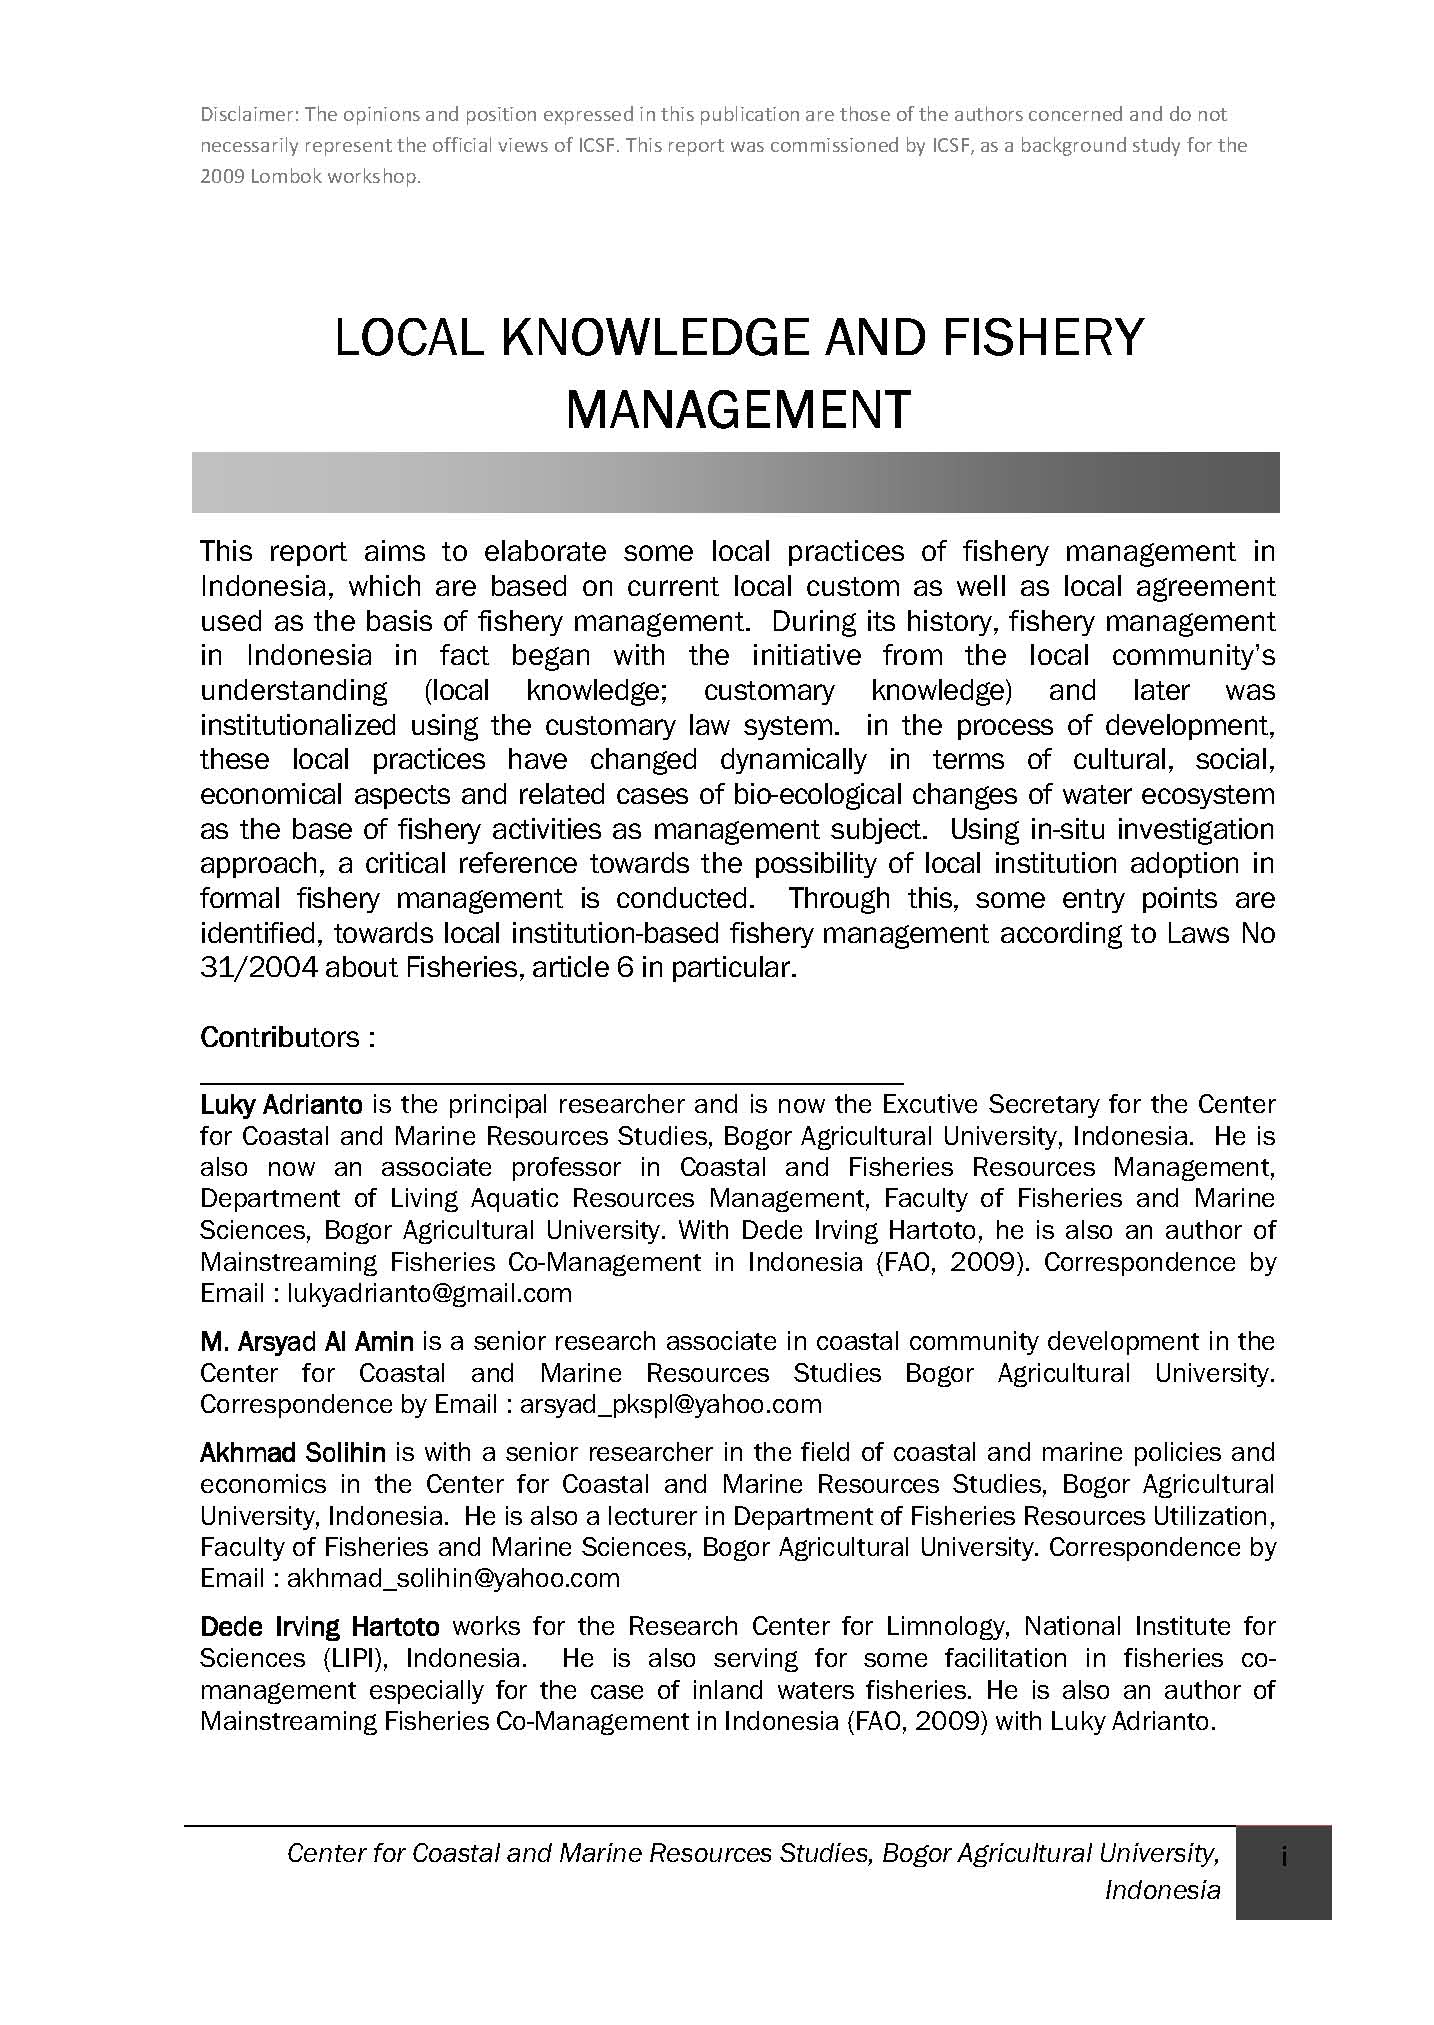 Local Knowledge and Fishery Management: This report was commissioned by ICSF, as a background study for the 2009 Lombok workshop